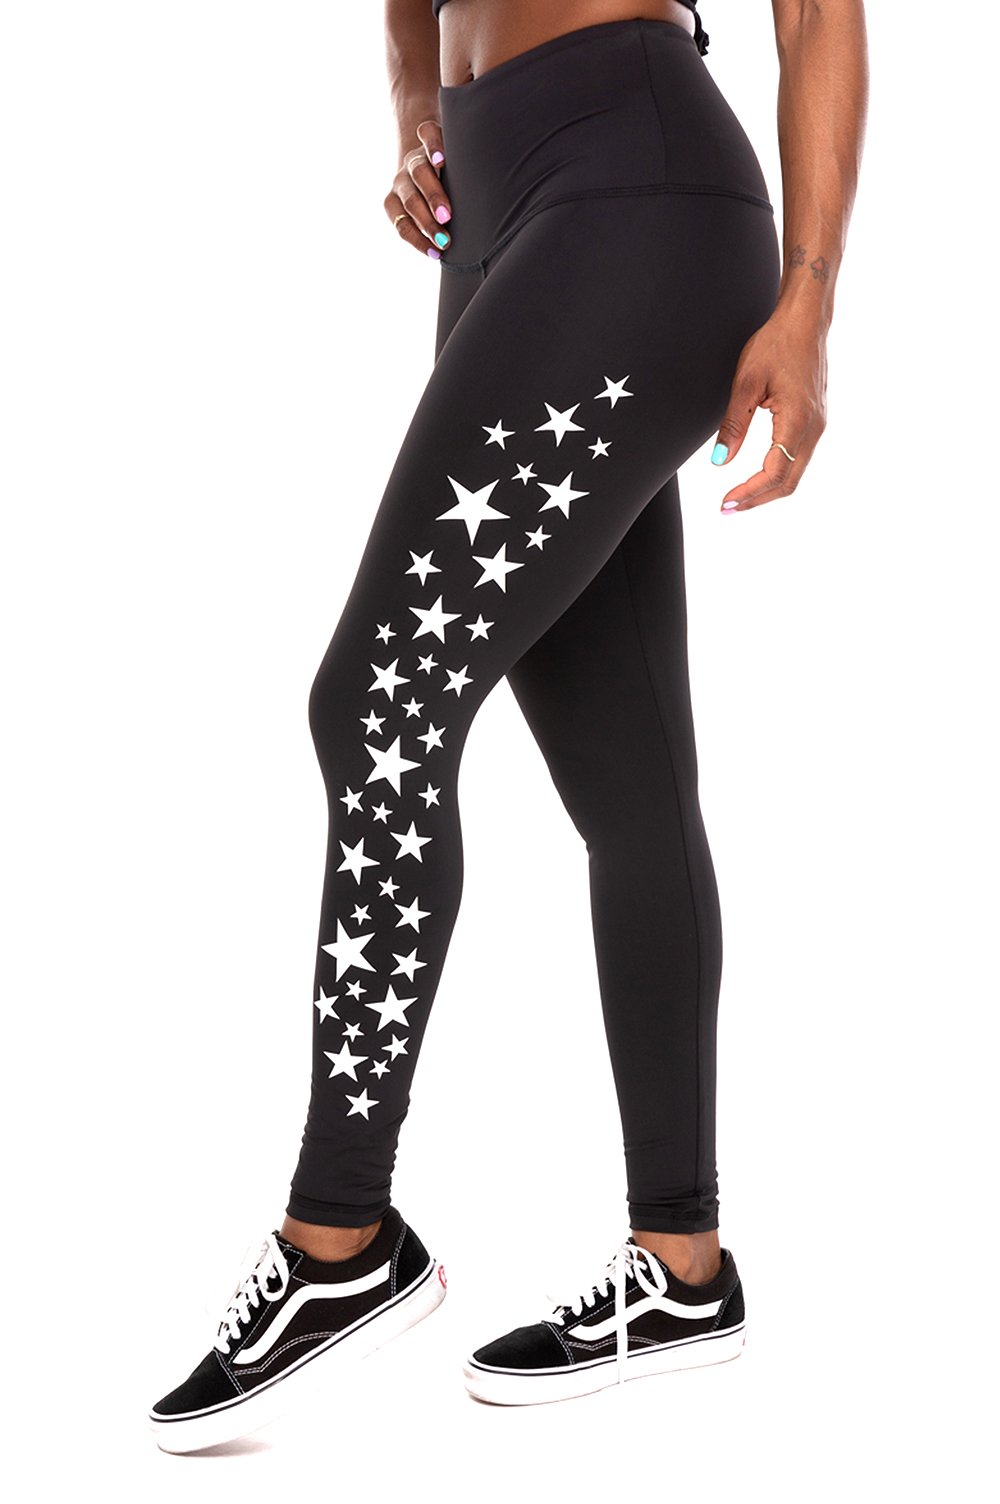 Star Cluster High Waist Ankle Legging - Black/White Stars - Sweat with Soul